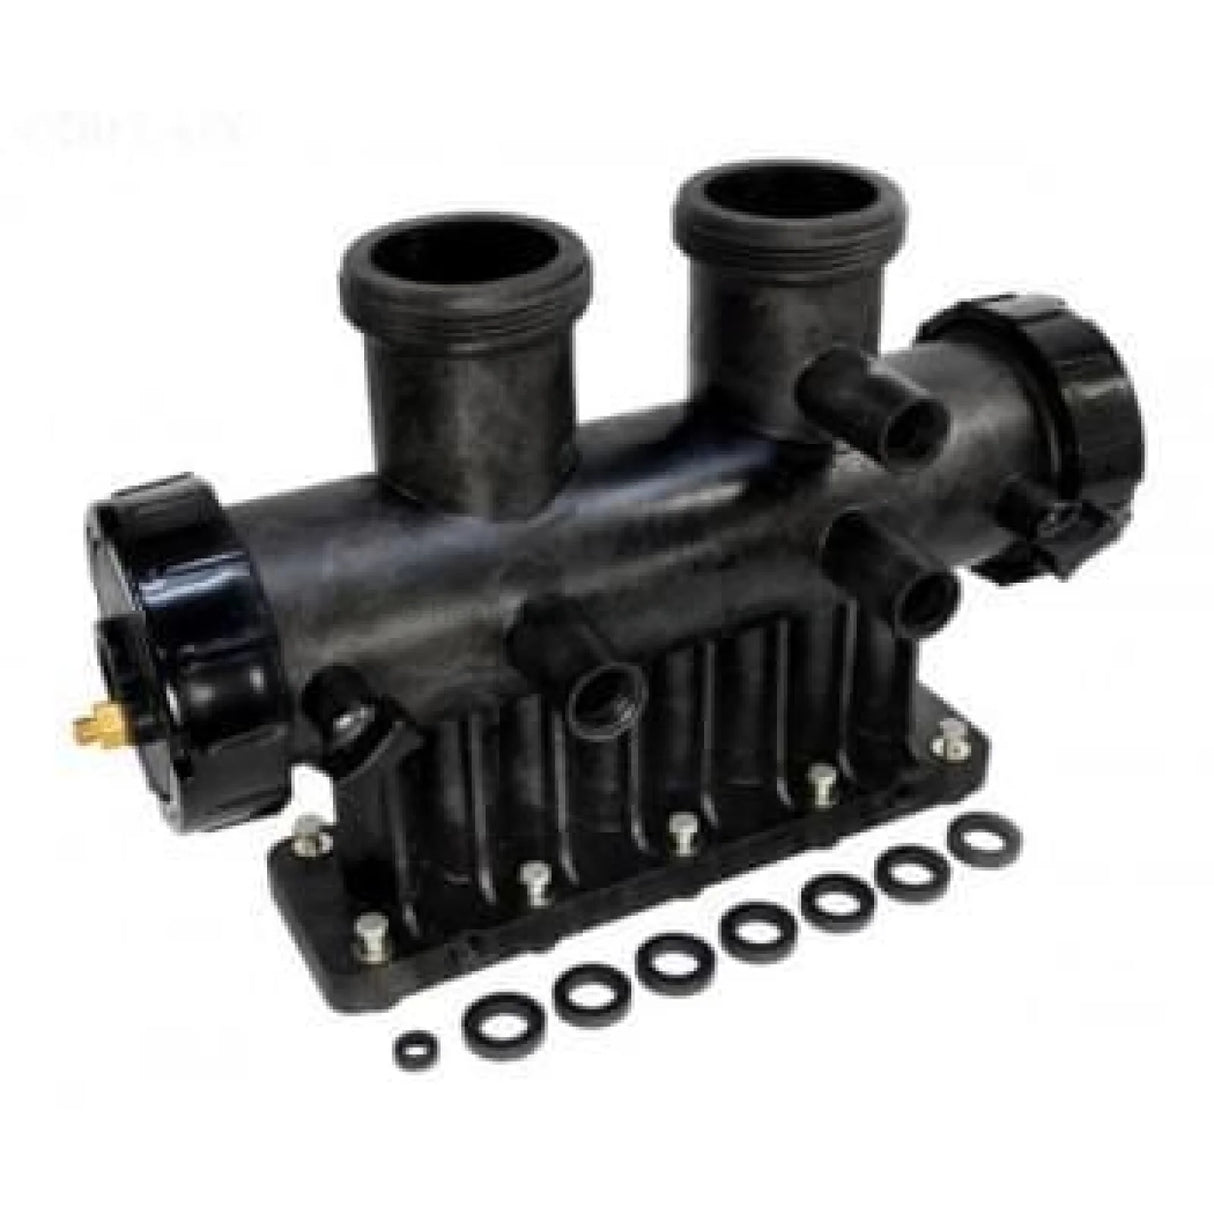 Zodiac LRZ / Jandy Lite 2 - Legacy Gas Heater - Inlet Outlet Manifold Header Assembly - Heater and Spa Parts